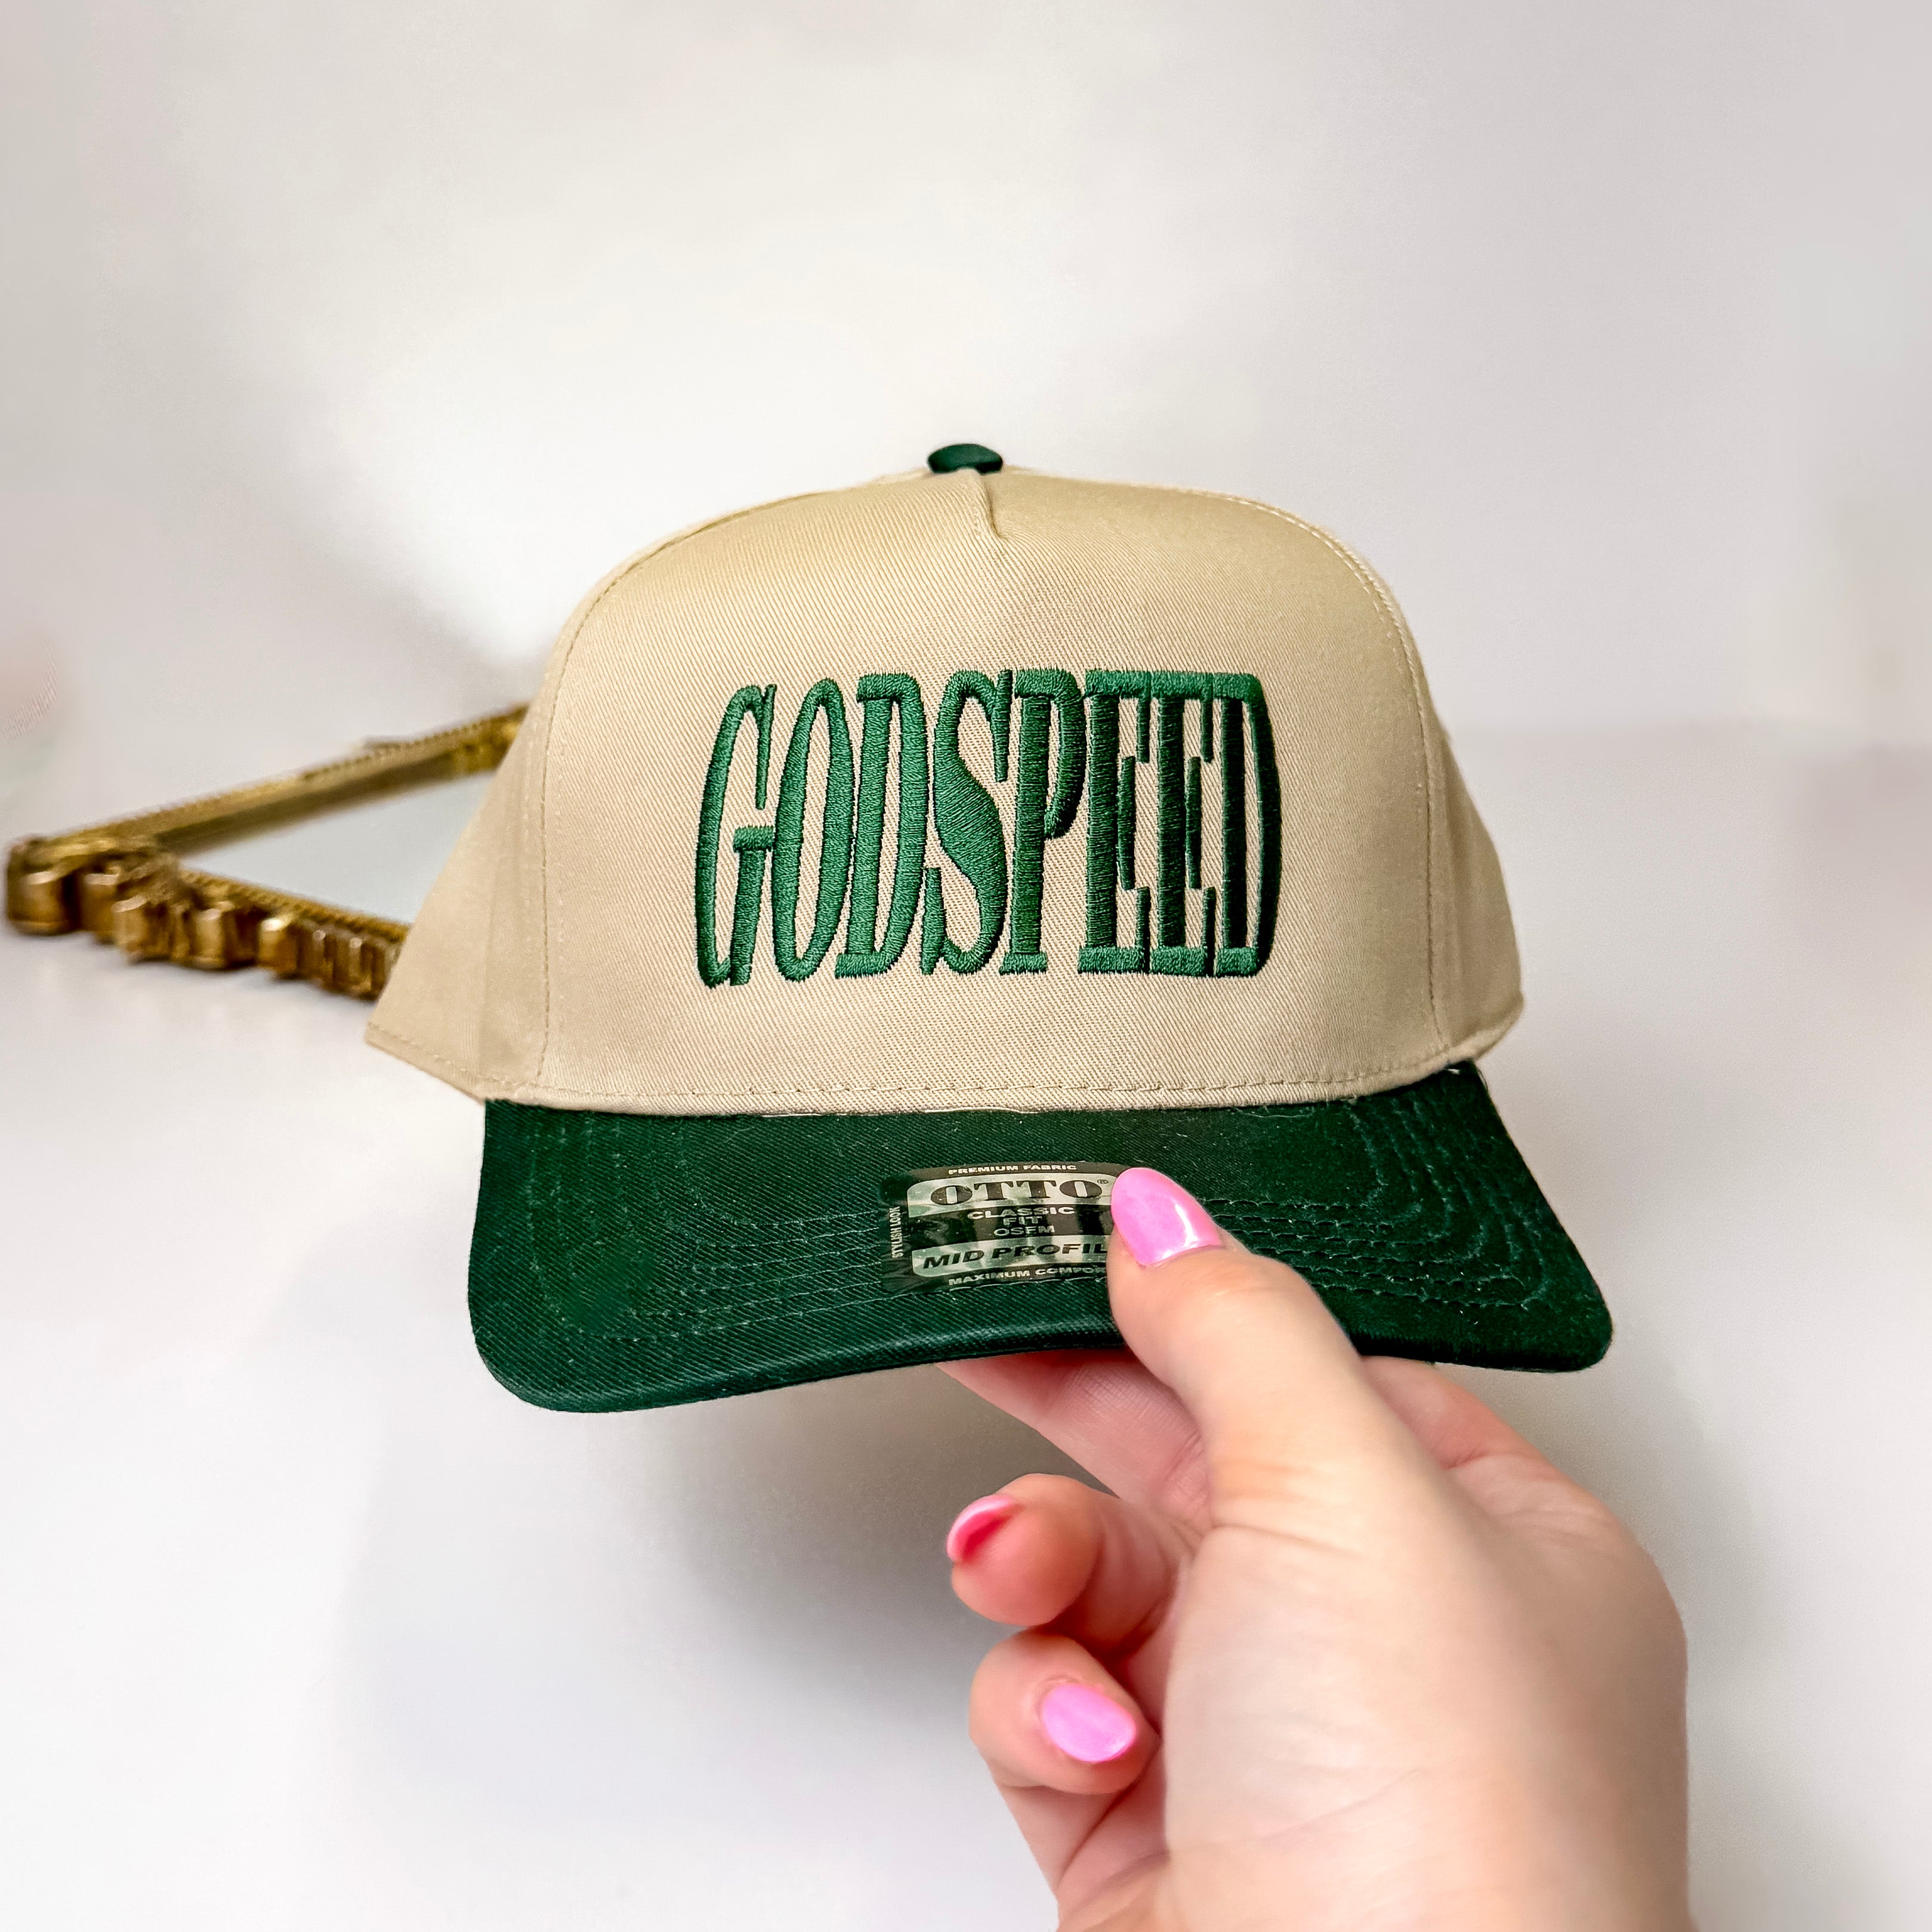 Godspeed Foam Vintage Hat in Khaki and Green - Giddy Up Glamour Boutique